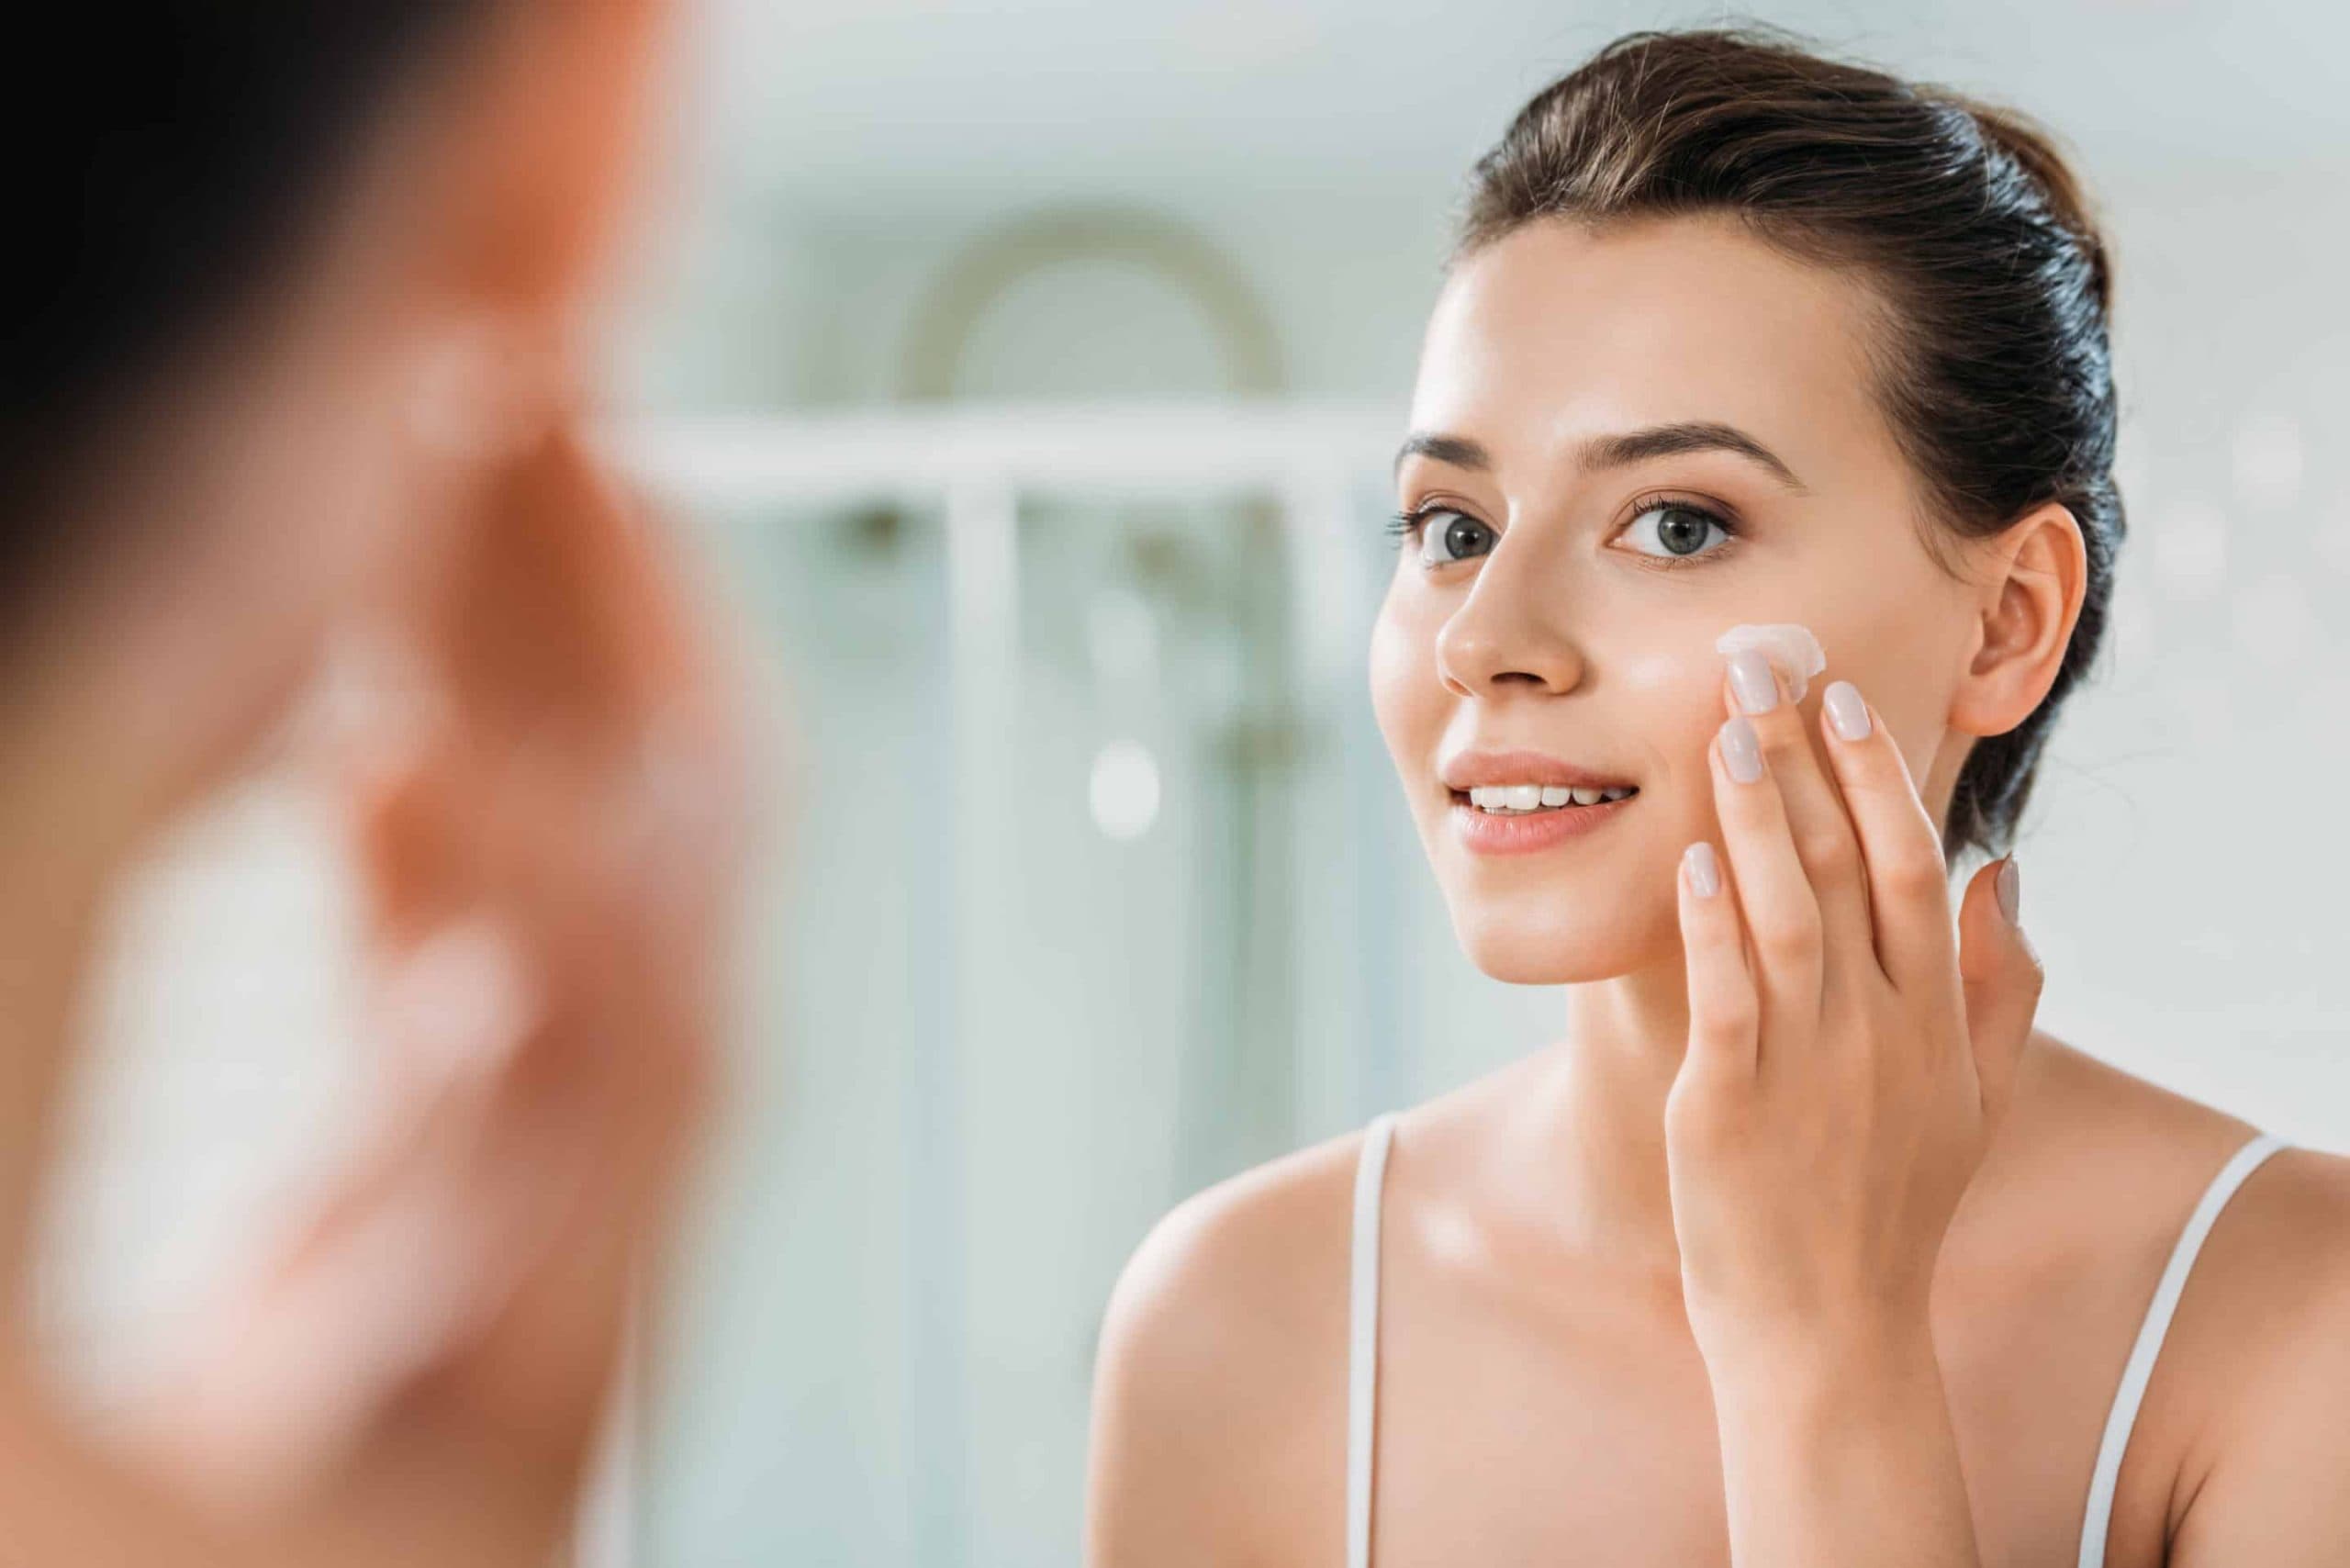 Skincare routines for healthy skin